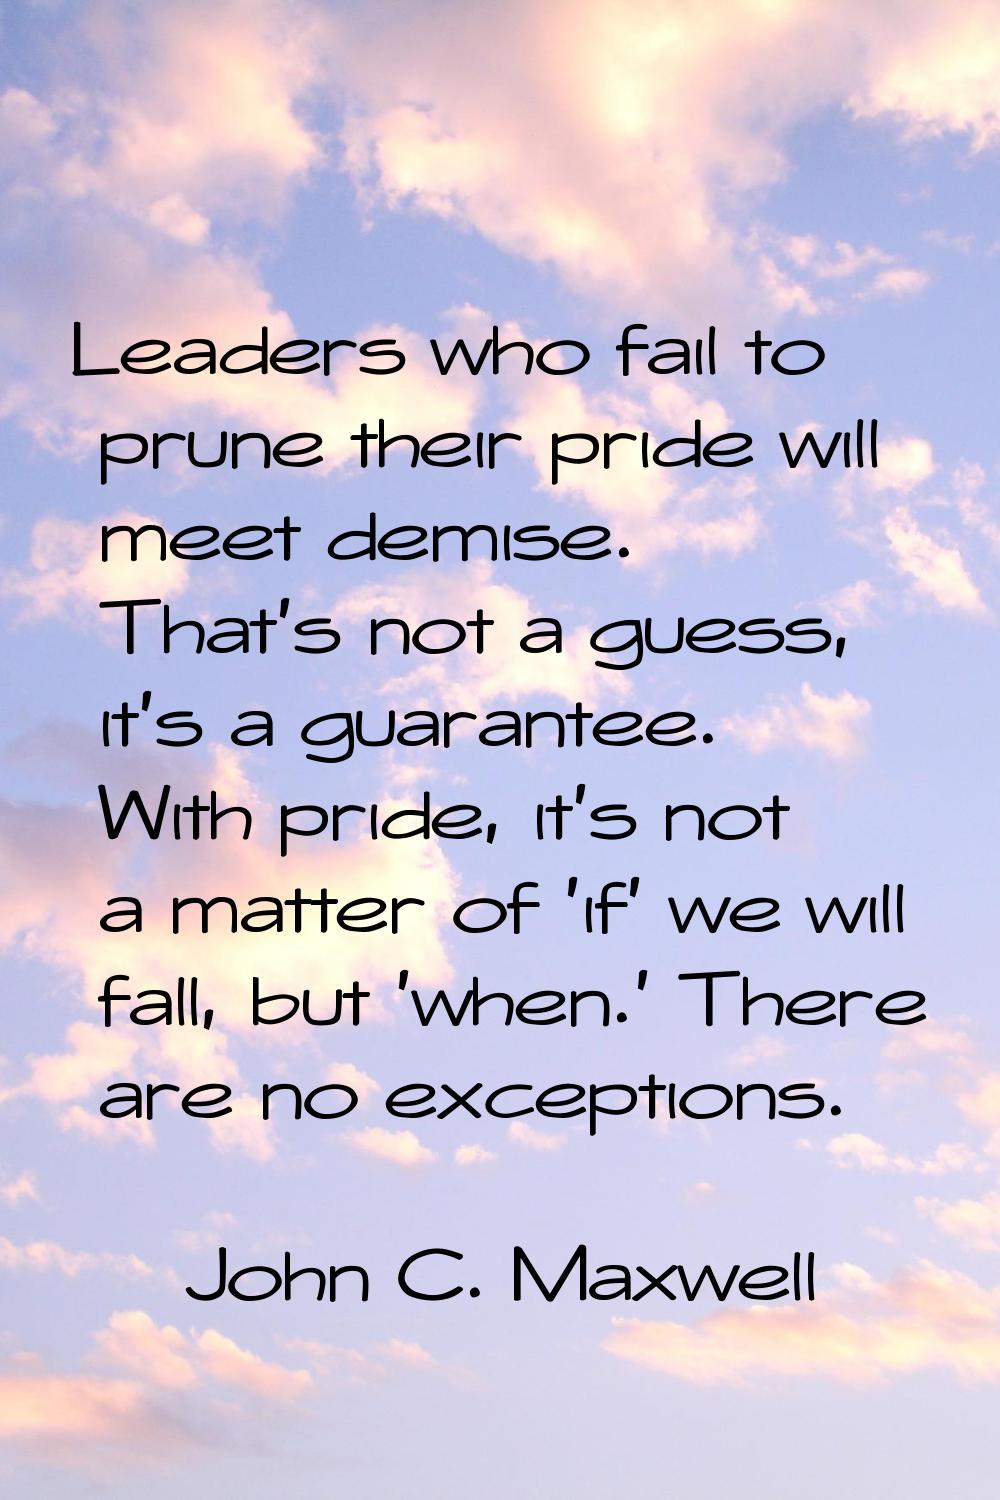 Leaders who fail to prune their pride will meet demise. That's not a guess, it's a guarantee. With 